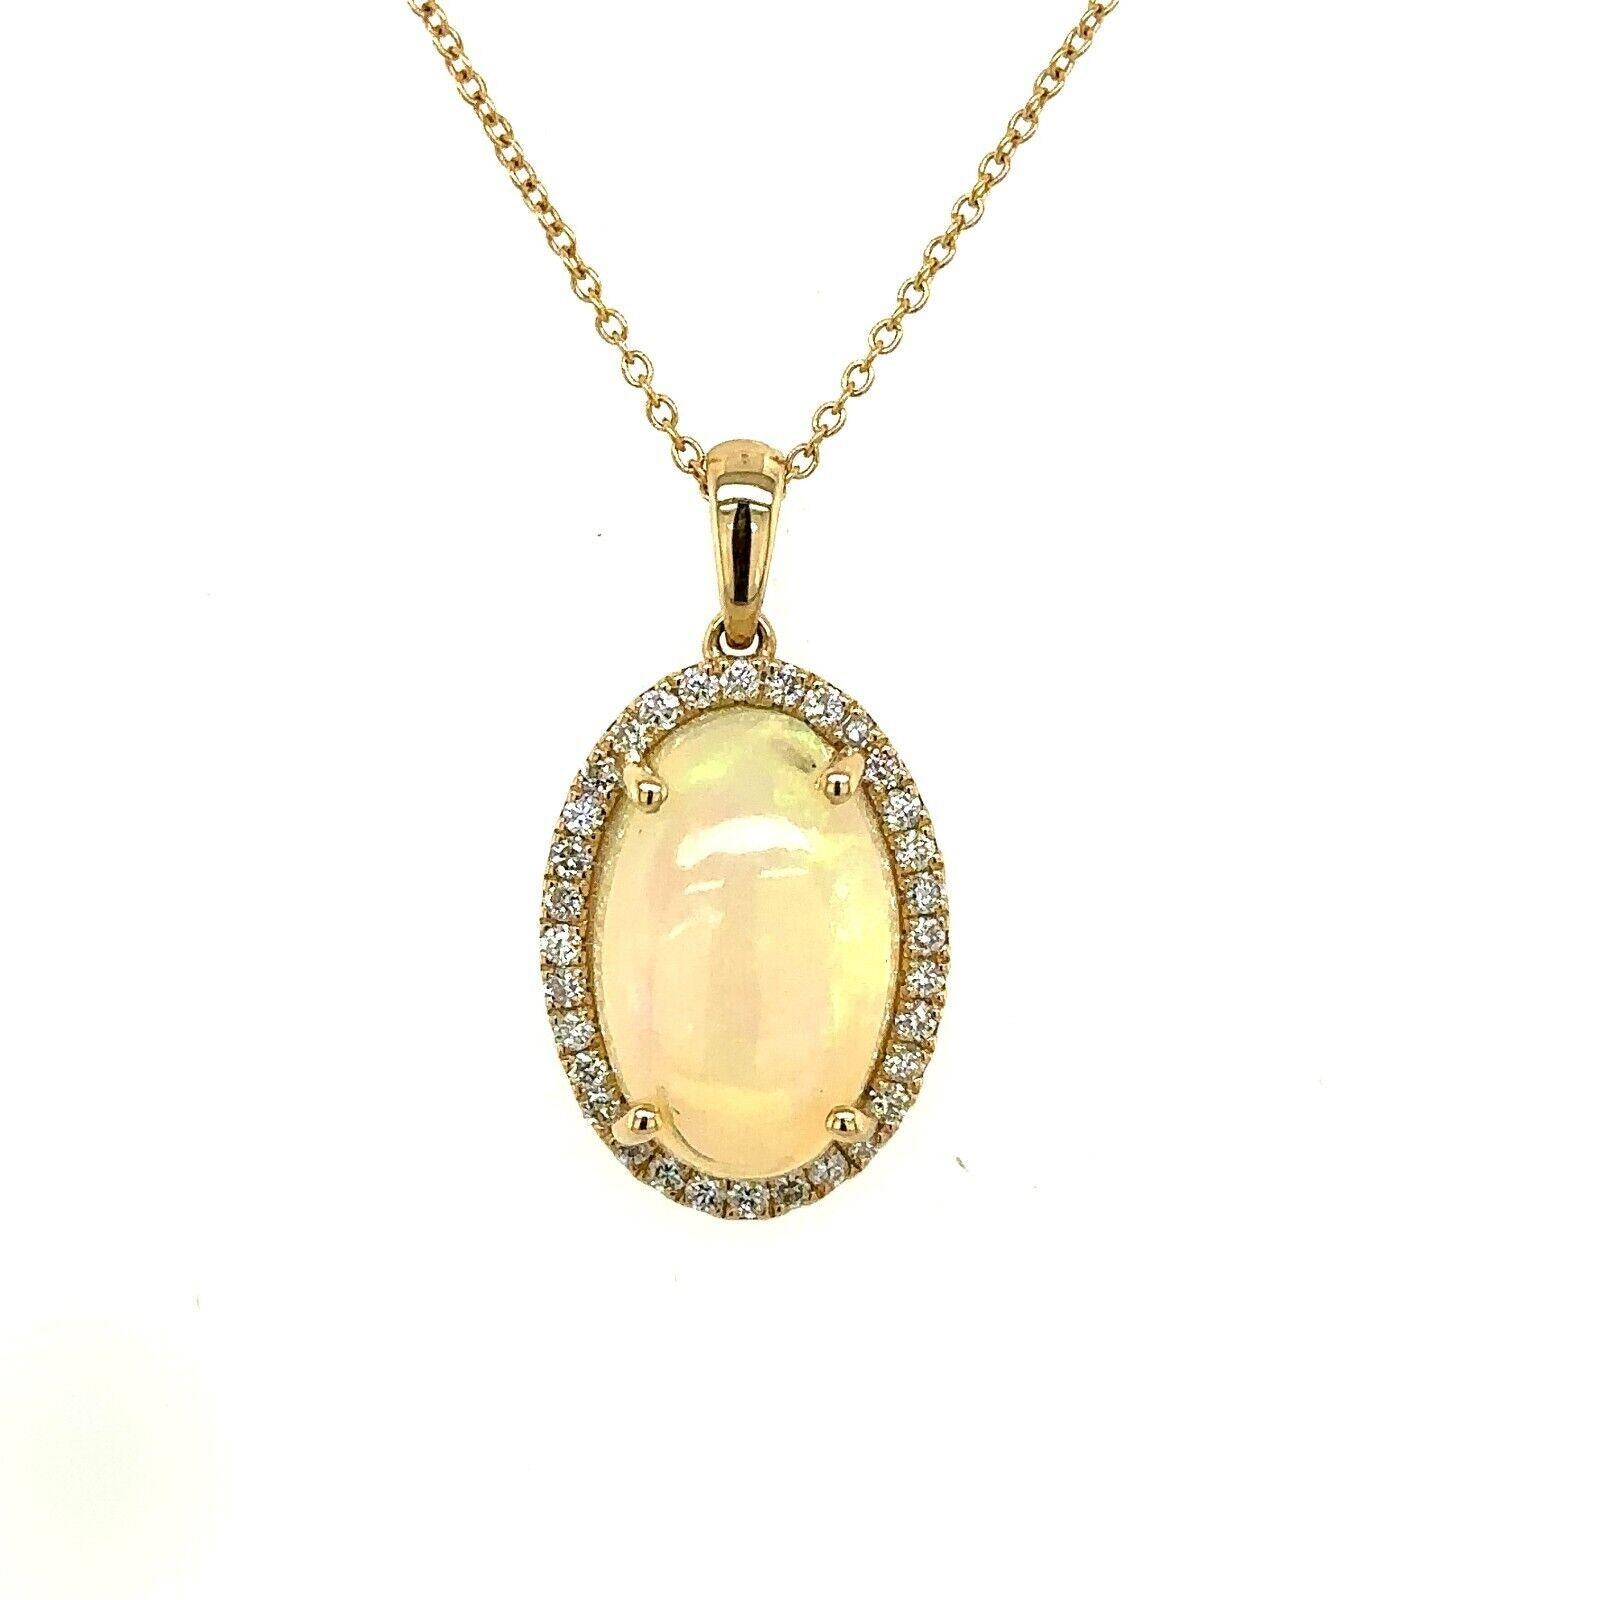 This Opal pendant is a unique piece of jewellery that is sure to make a statement. The Opal is surrounded by 0.25ct Diamonds that create a beautiful contrast with the Opal. The Opal is a natural stone.  If you are looking for a natural Opal pendant